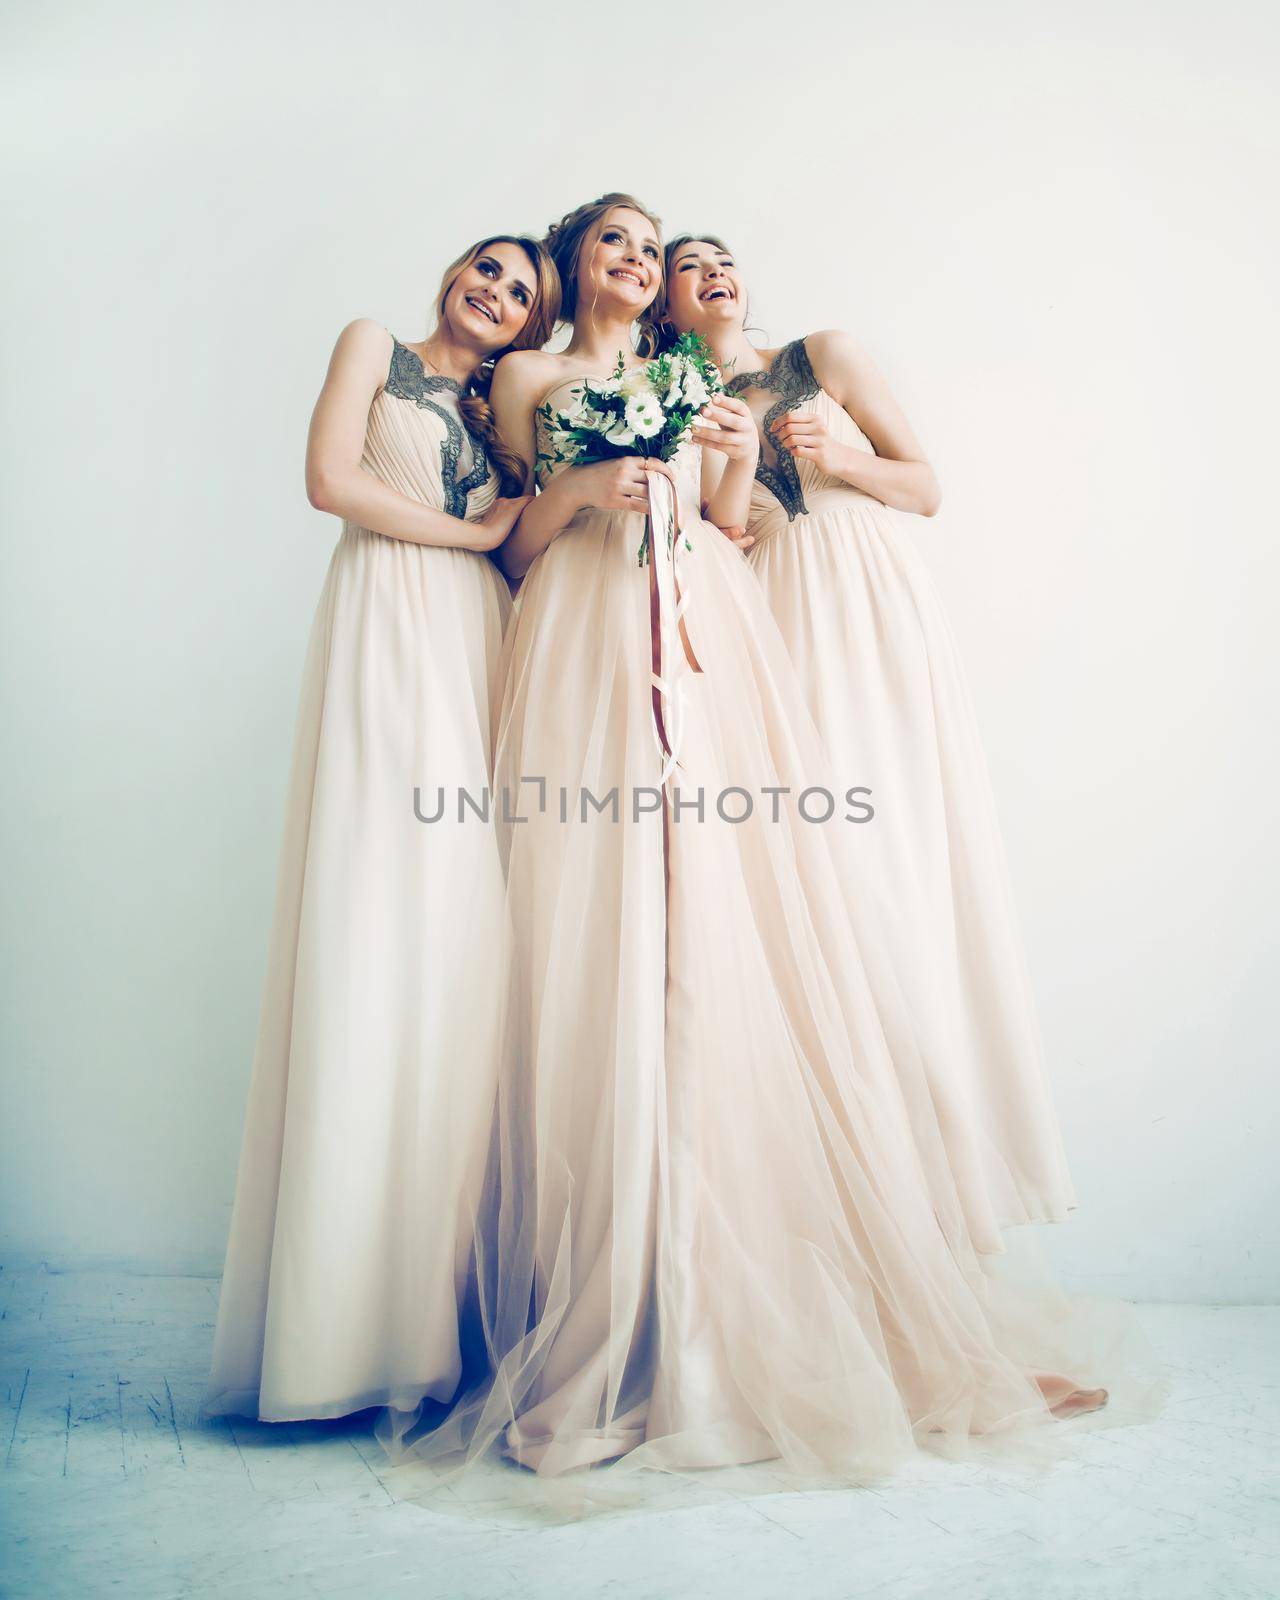 in full growth.three beautiful girls in dresses for the wedding ceremony. by SmartPhotoLab